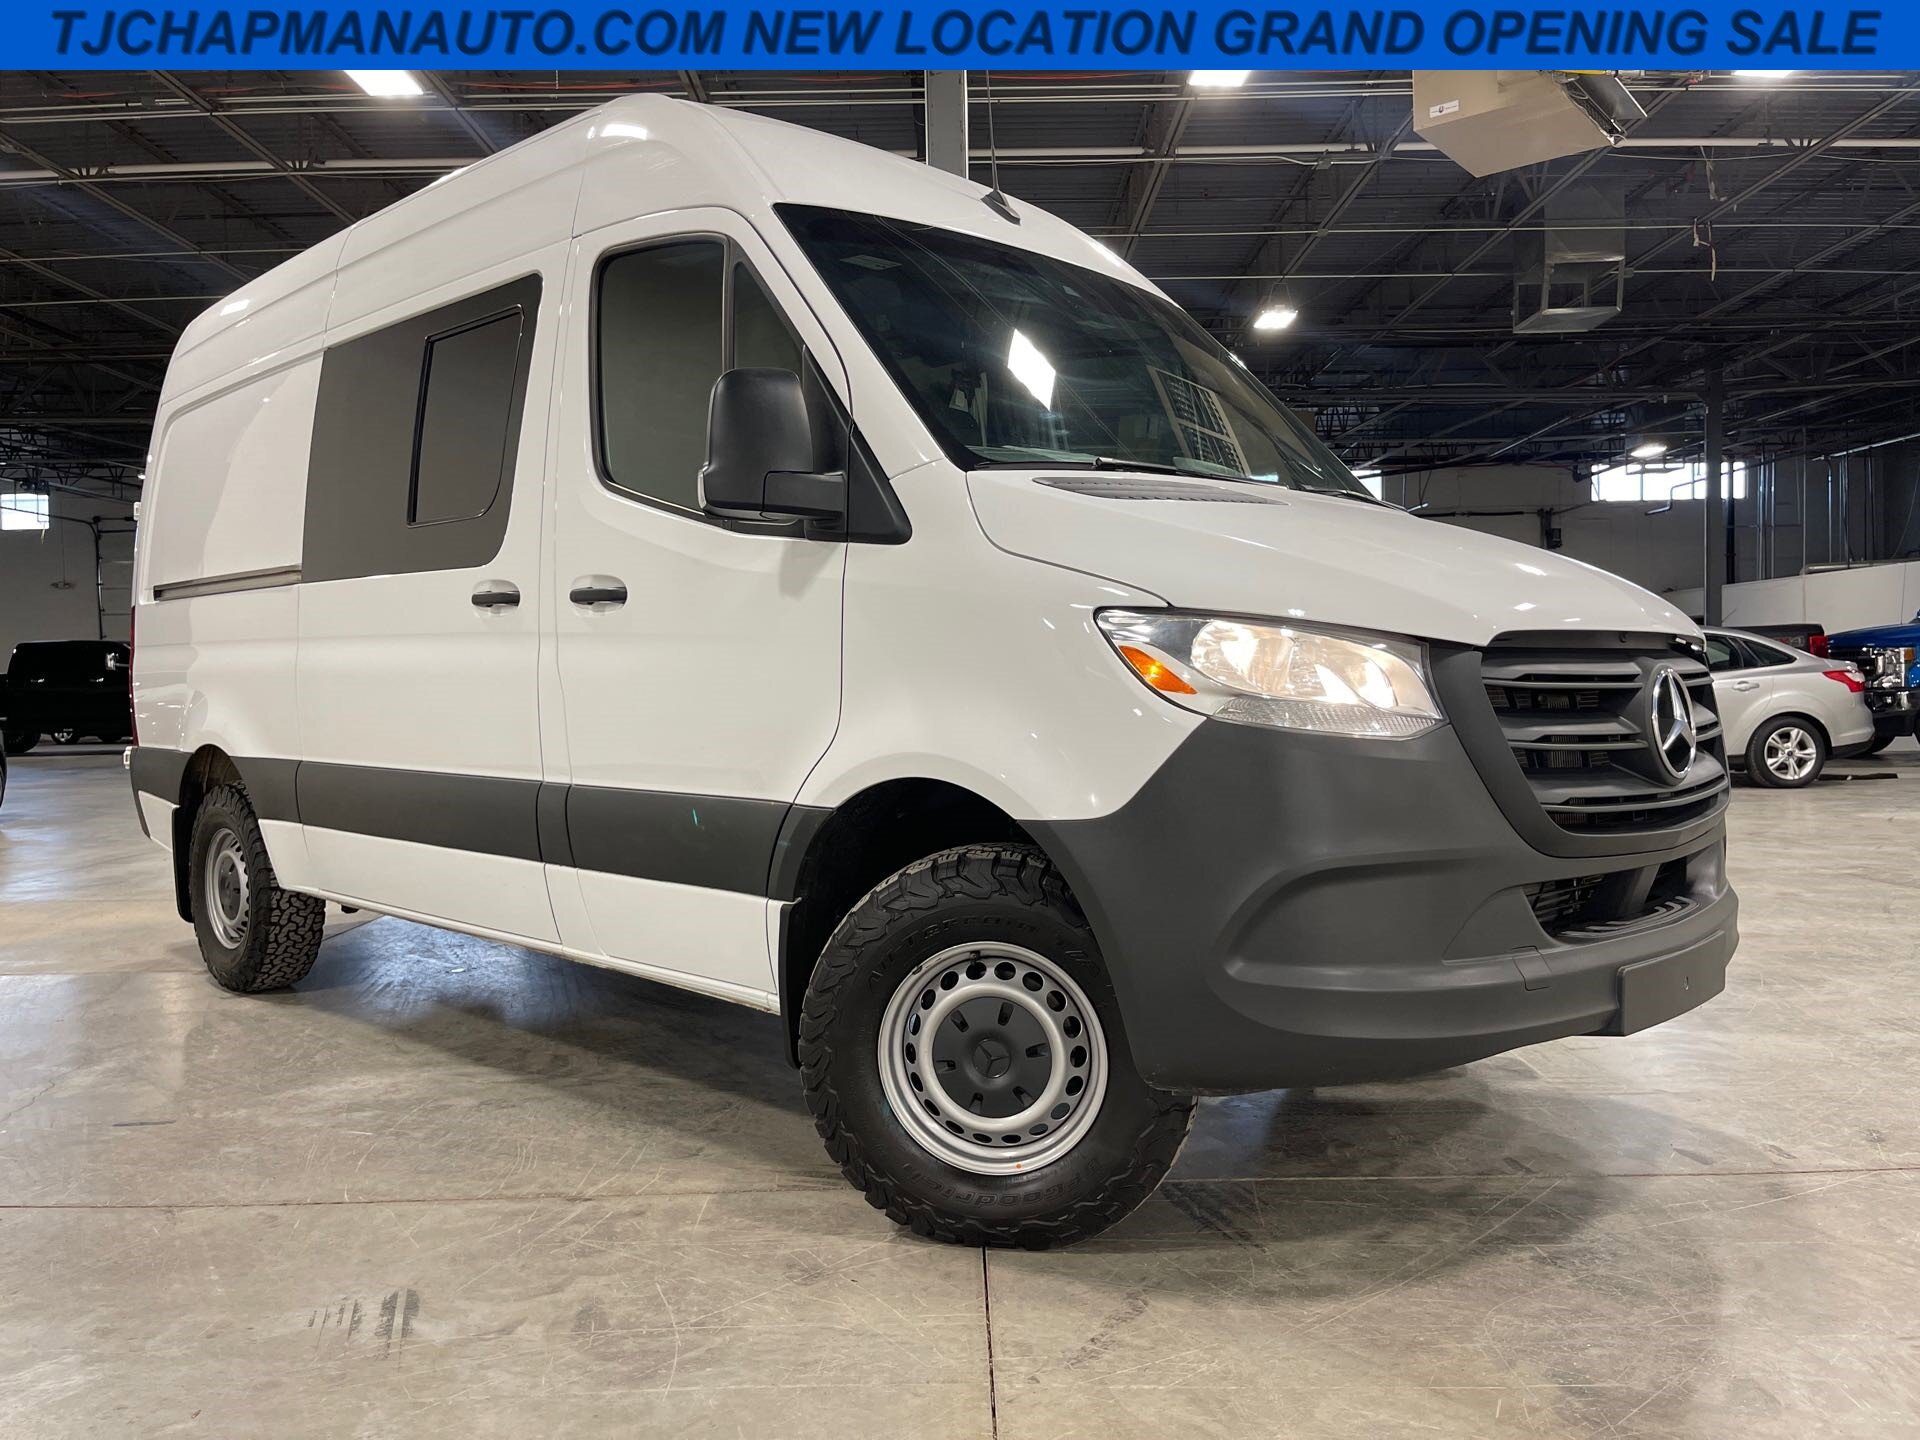 Used Mercedes-Benz Sprinter 1500 for Sale Right Now - Autotrader